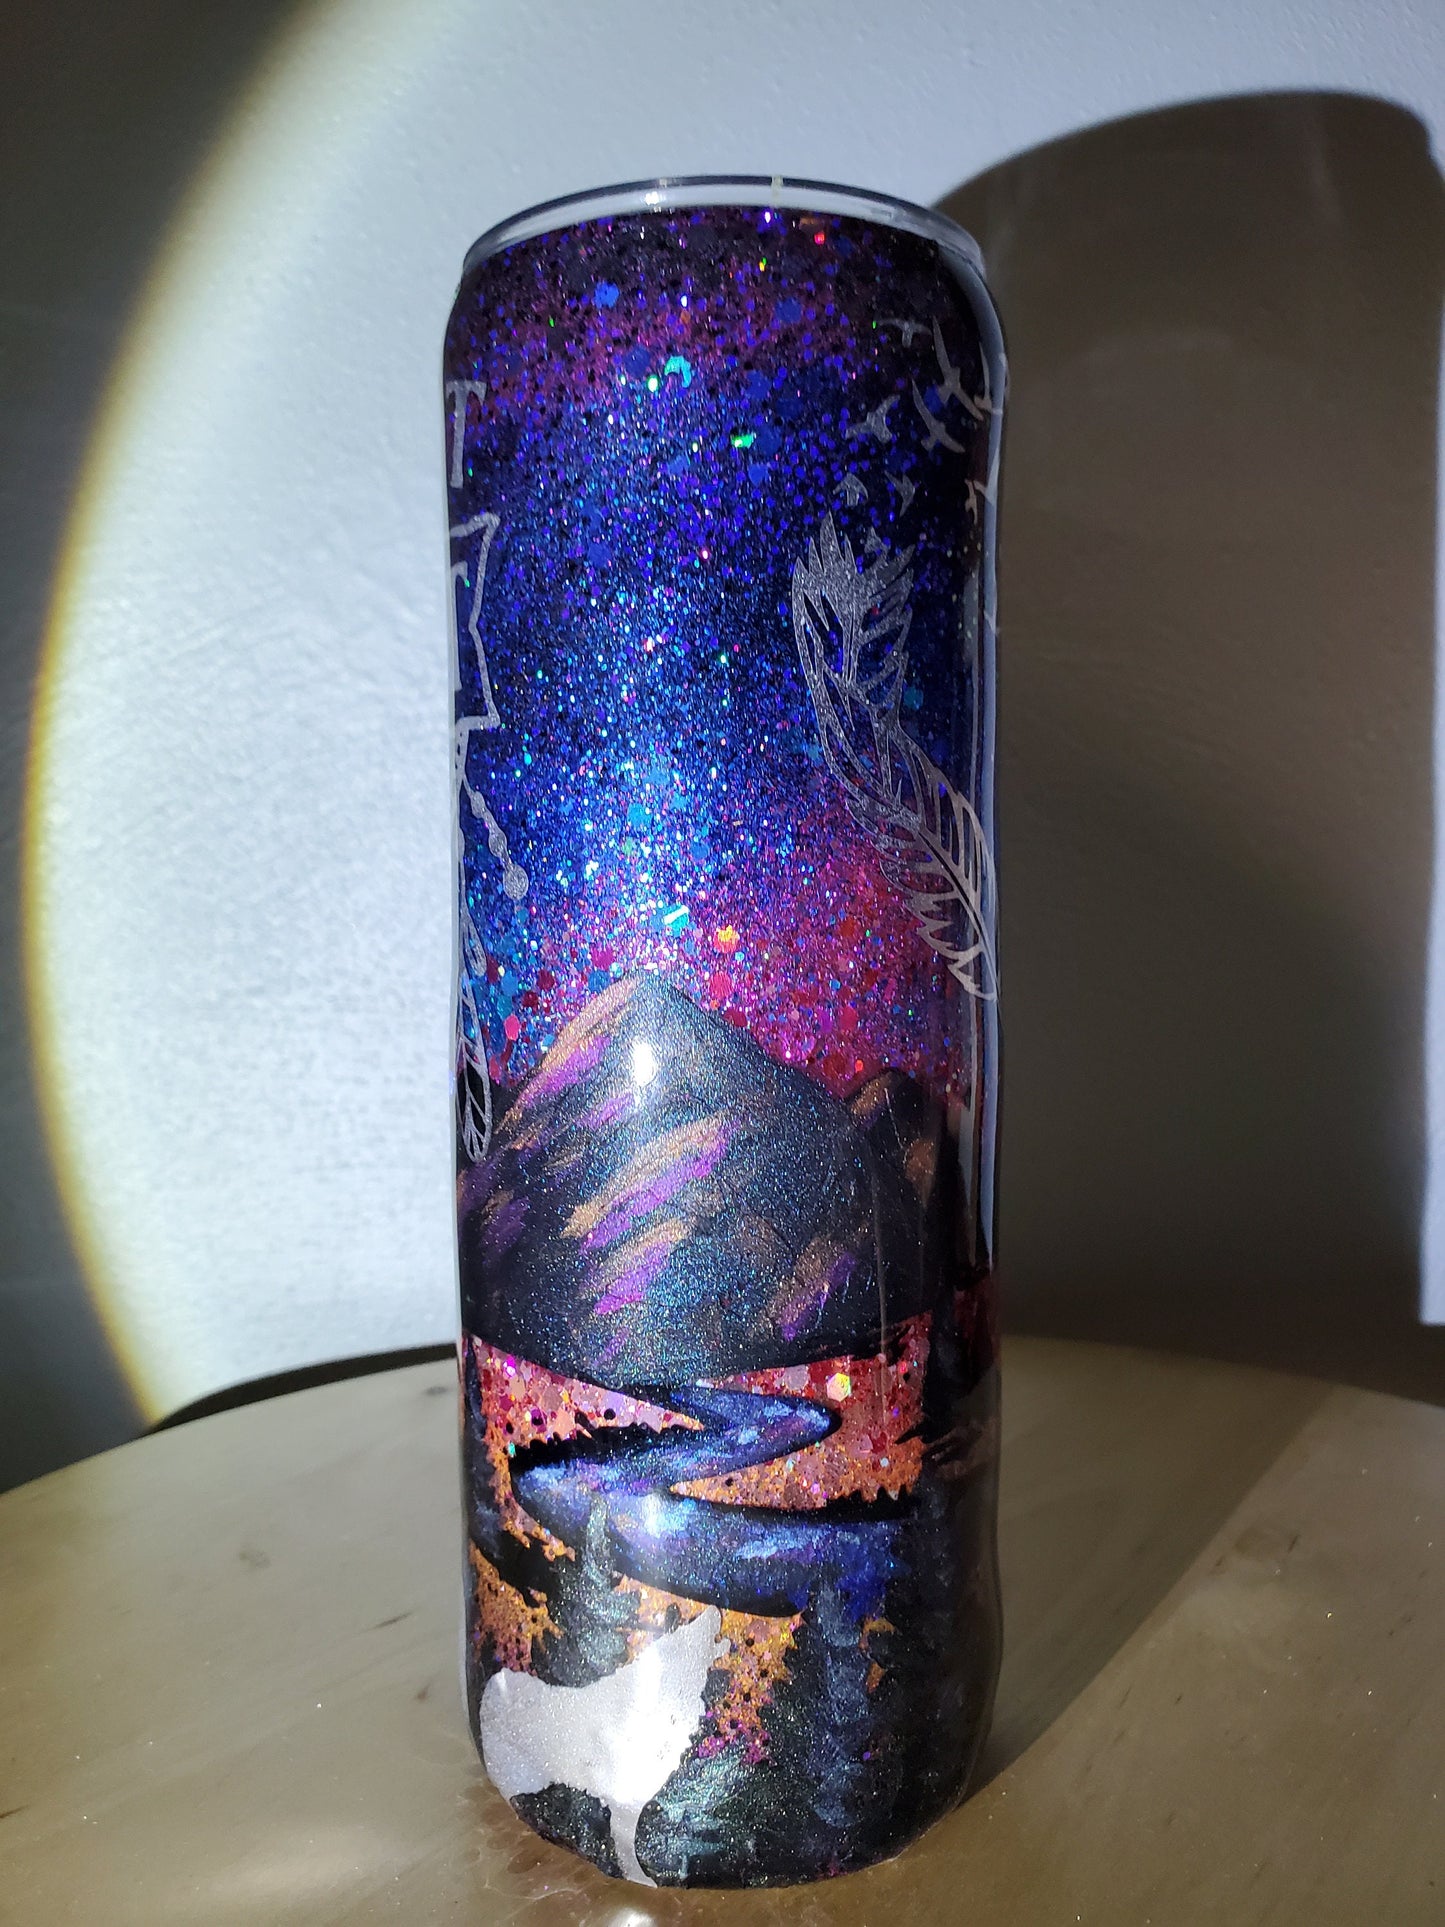 Sunset Forest Mountains Wild at Heart Custom Hand Painted Glitter Tumbler